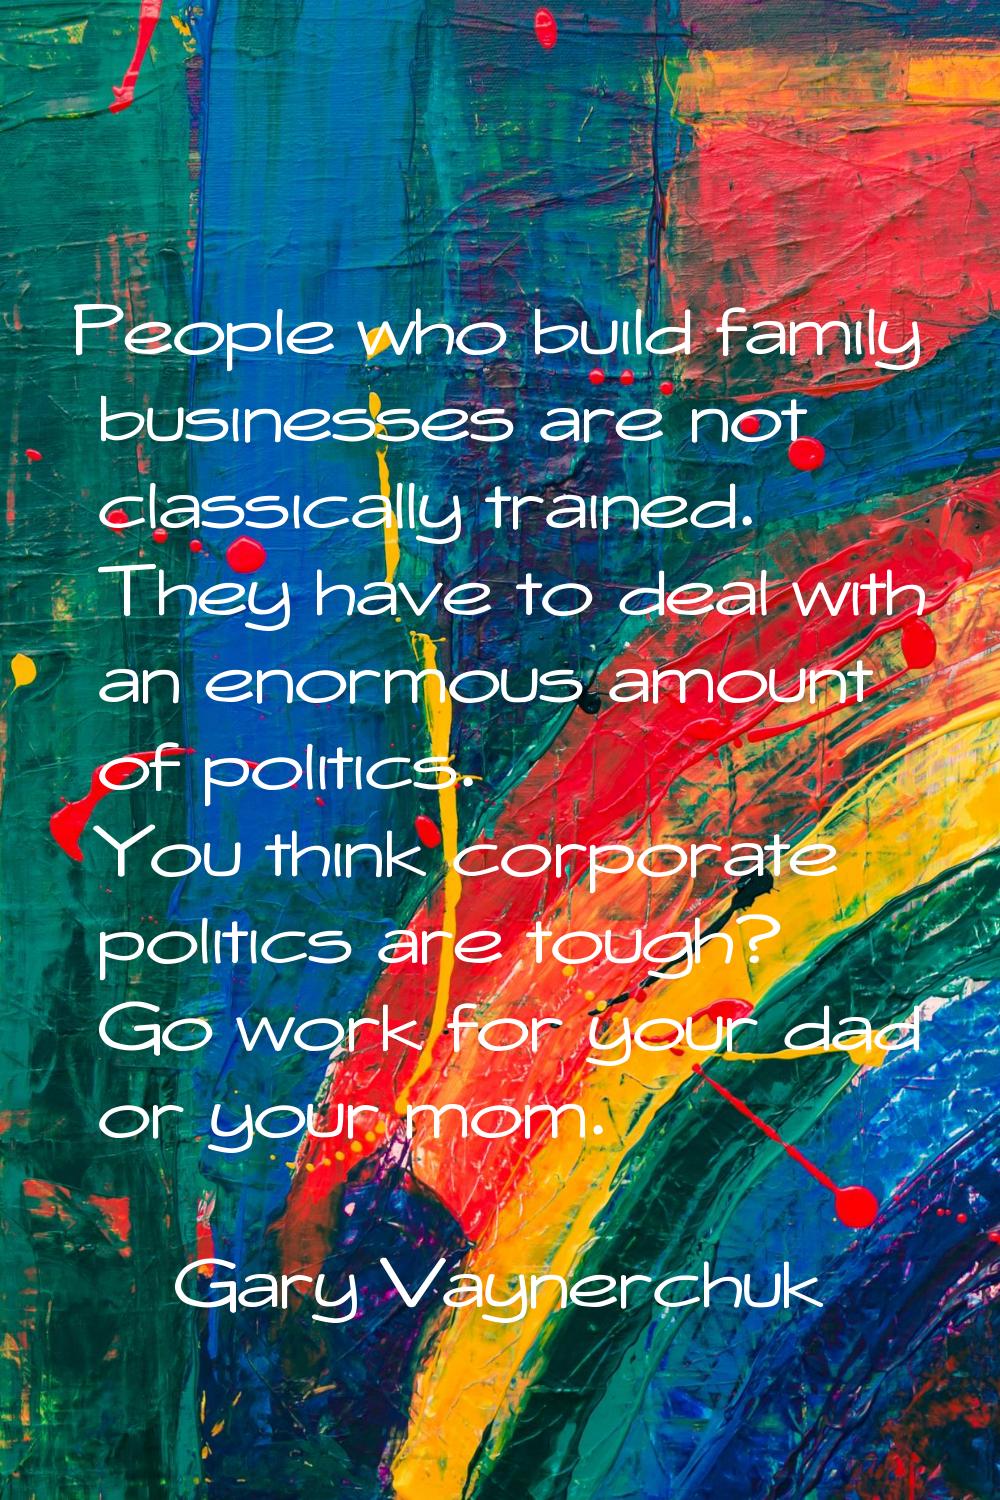 People who build family businesses are not classically trained. They have to deal with an enormous 